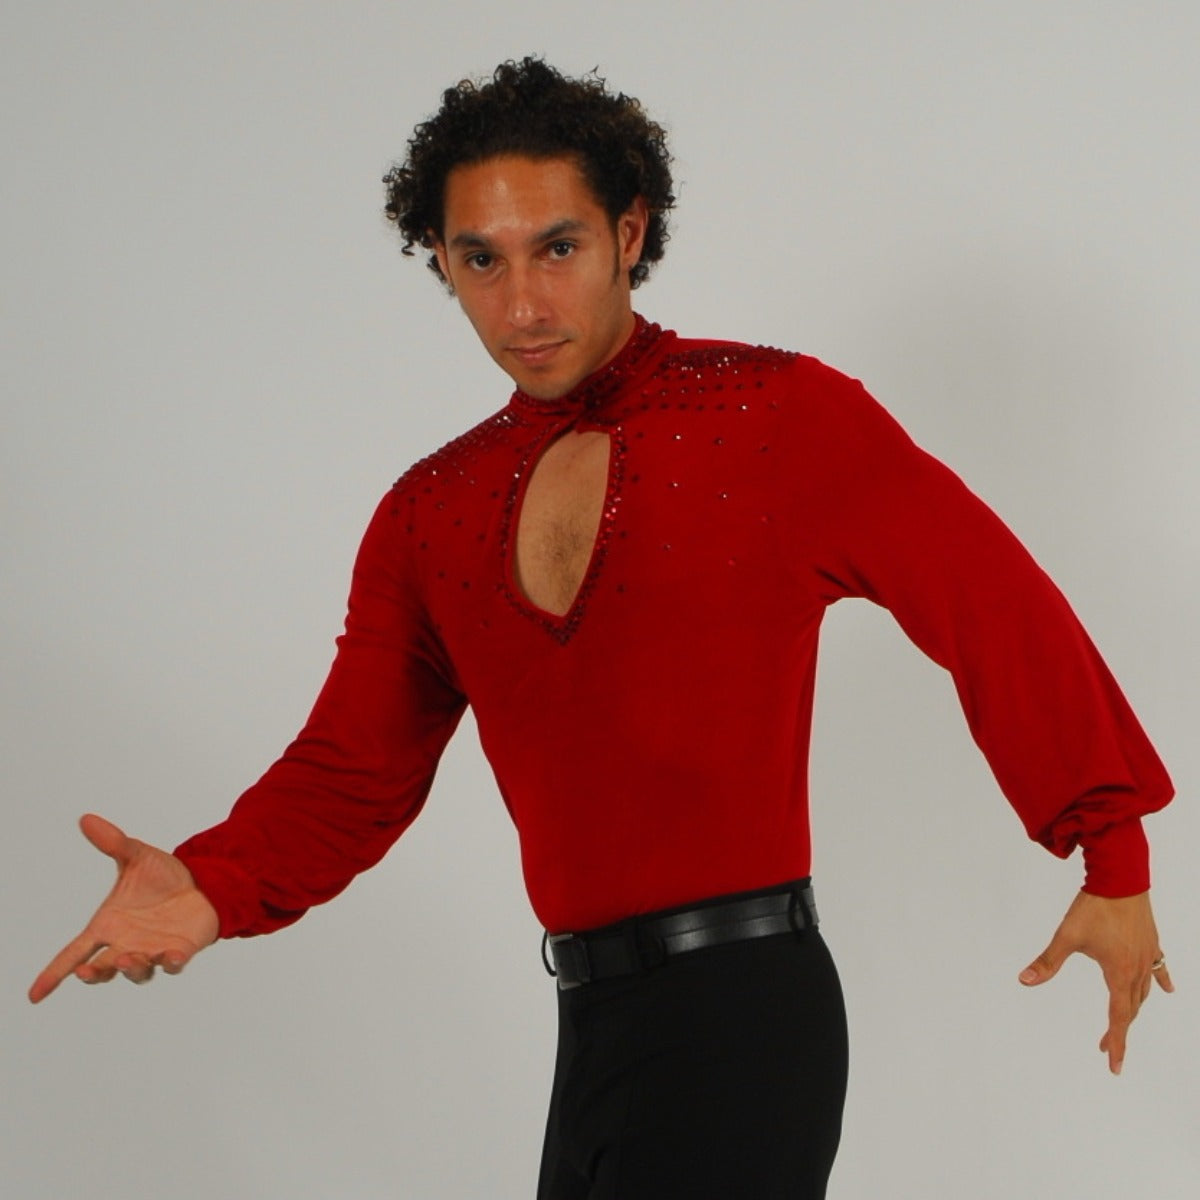 Crystal's Creations men's red Latin shirt